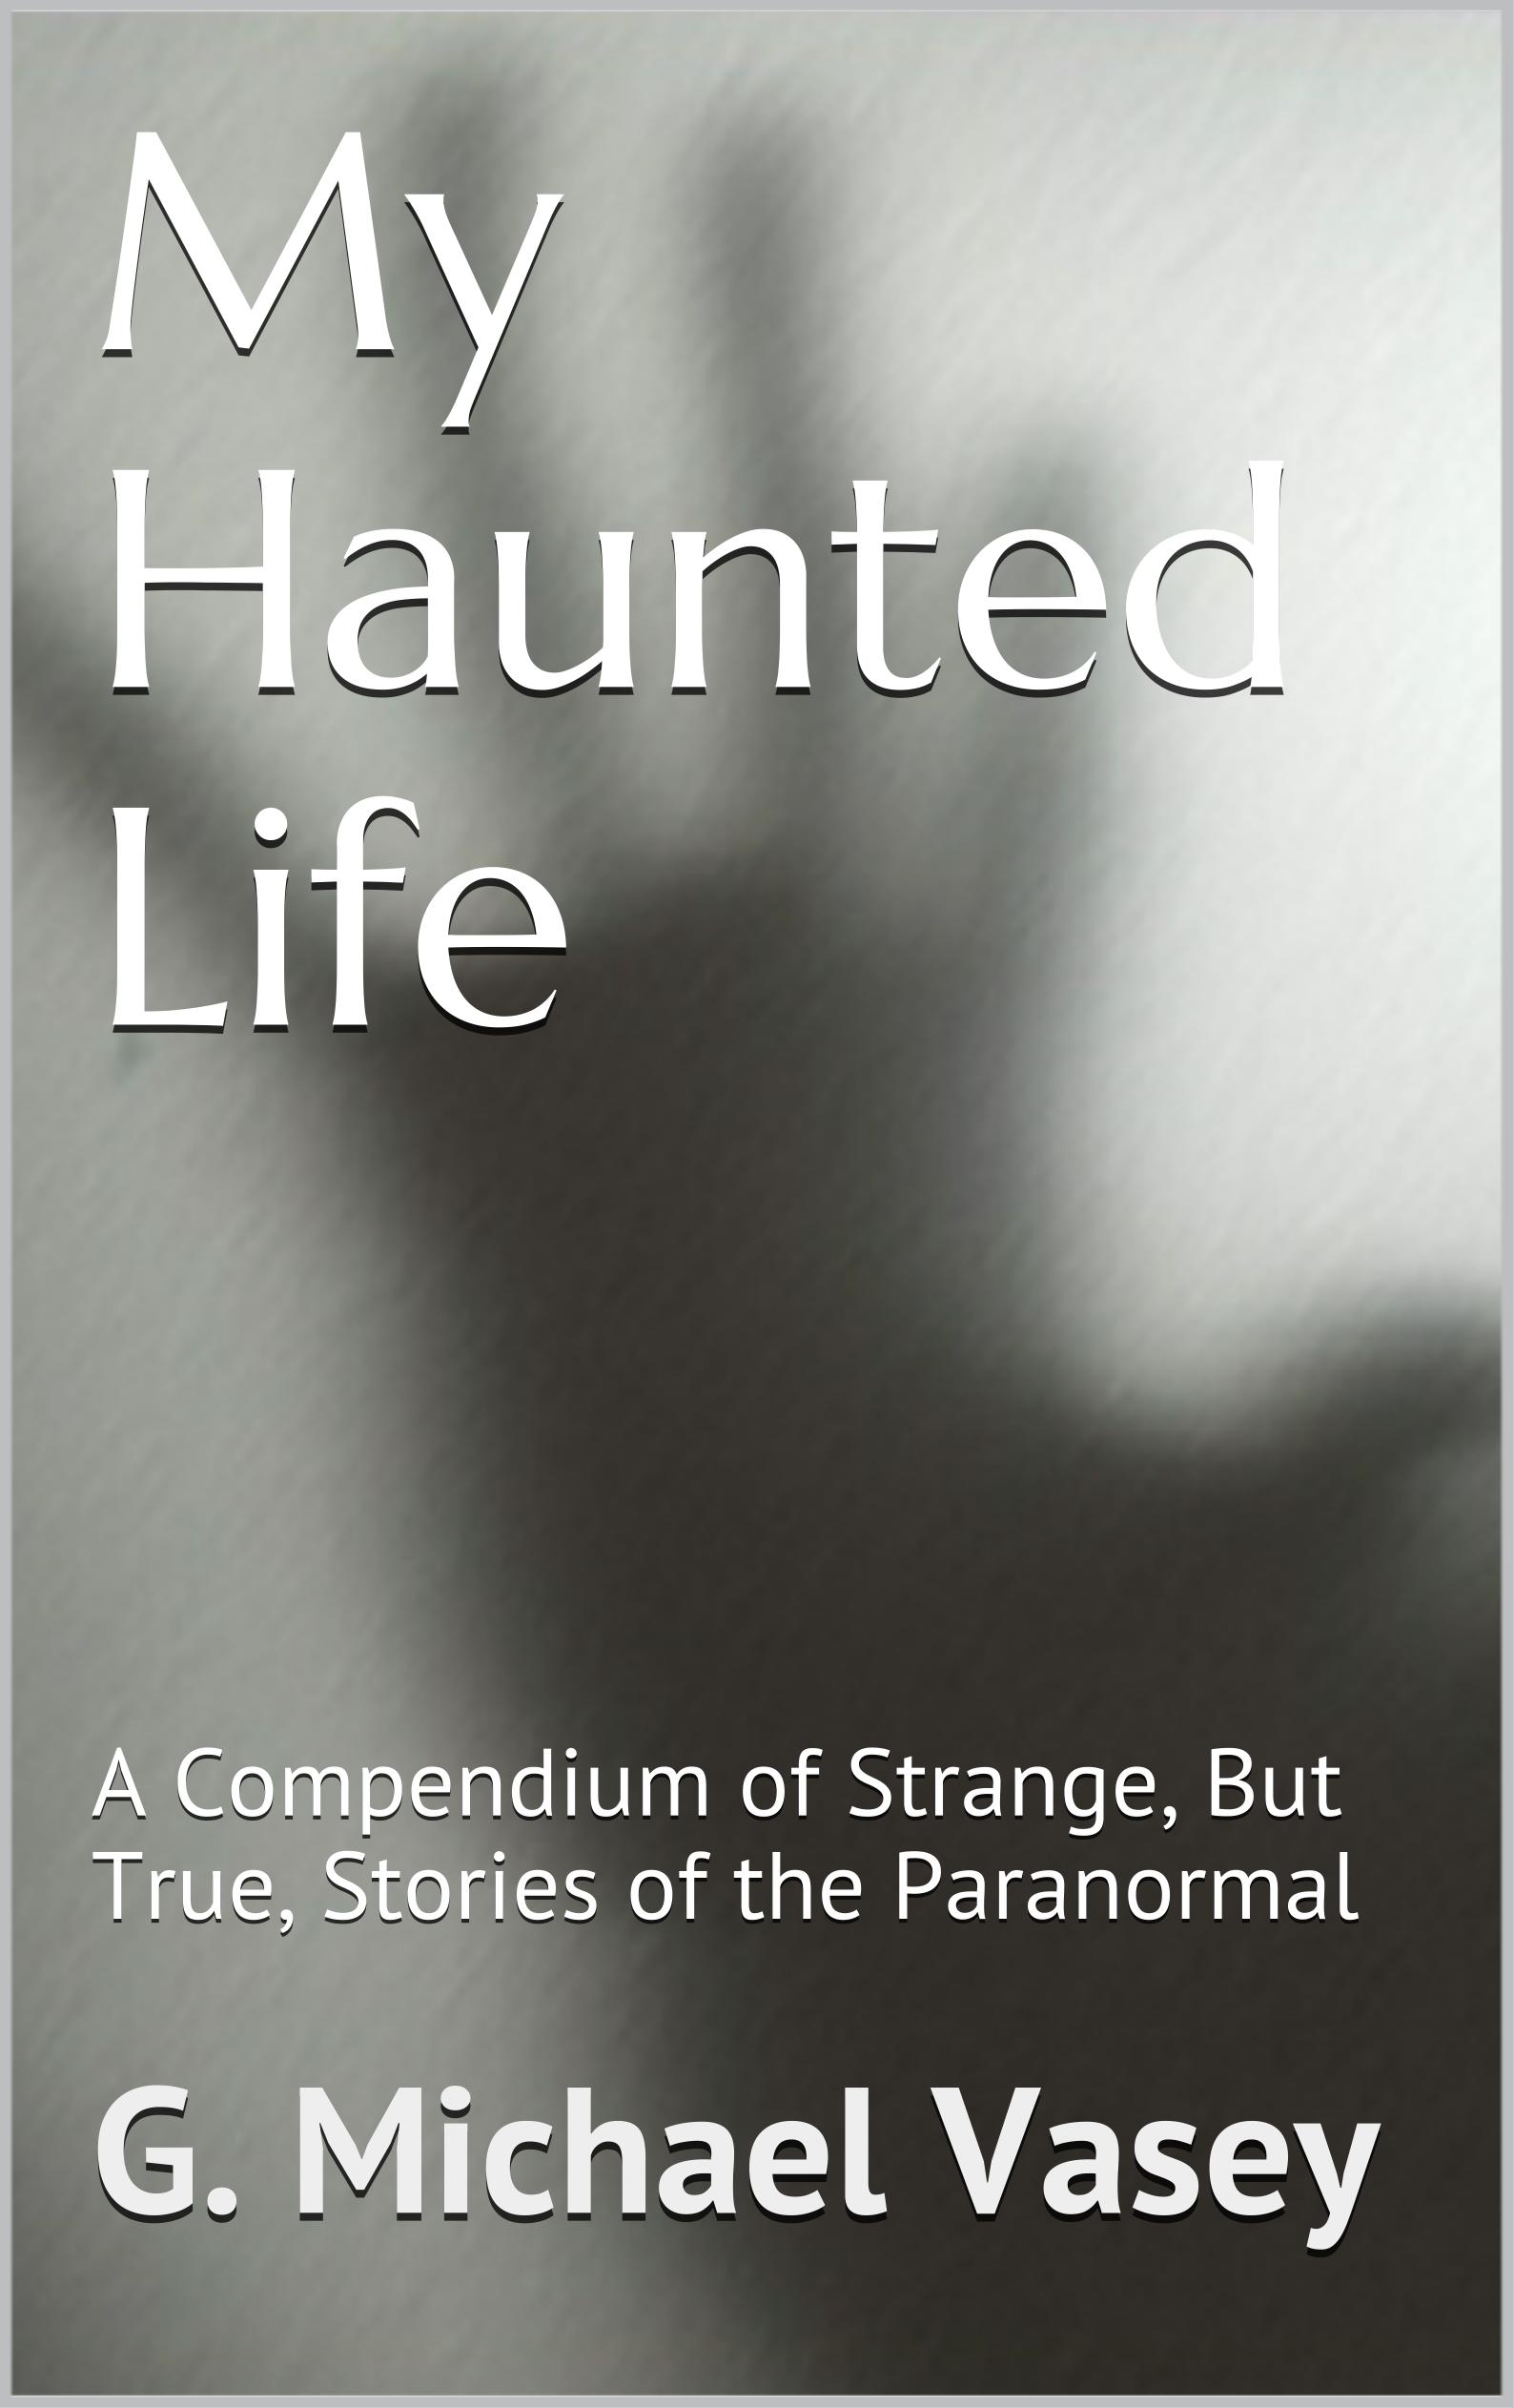 My Haunted Life – A Compendium of Strange (But True) Stories of the Paranormal